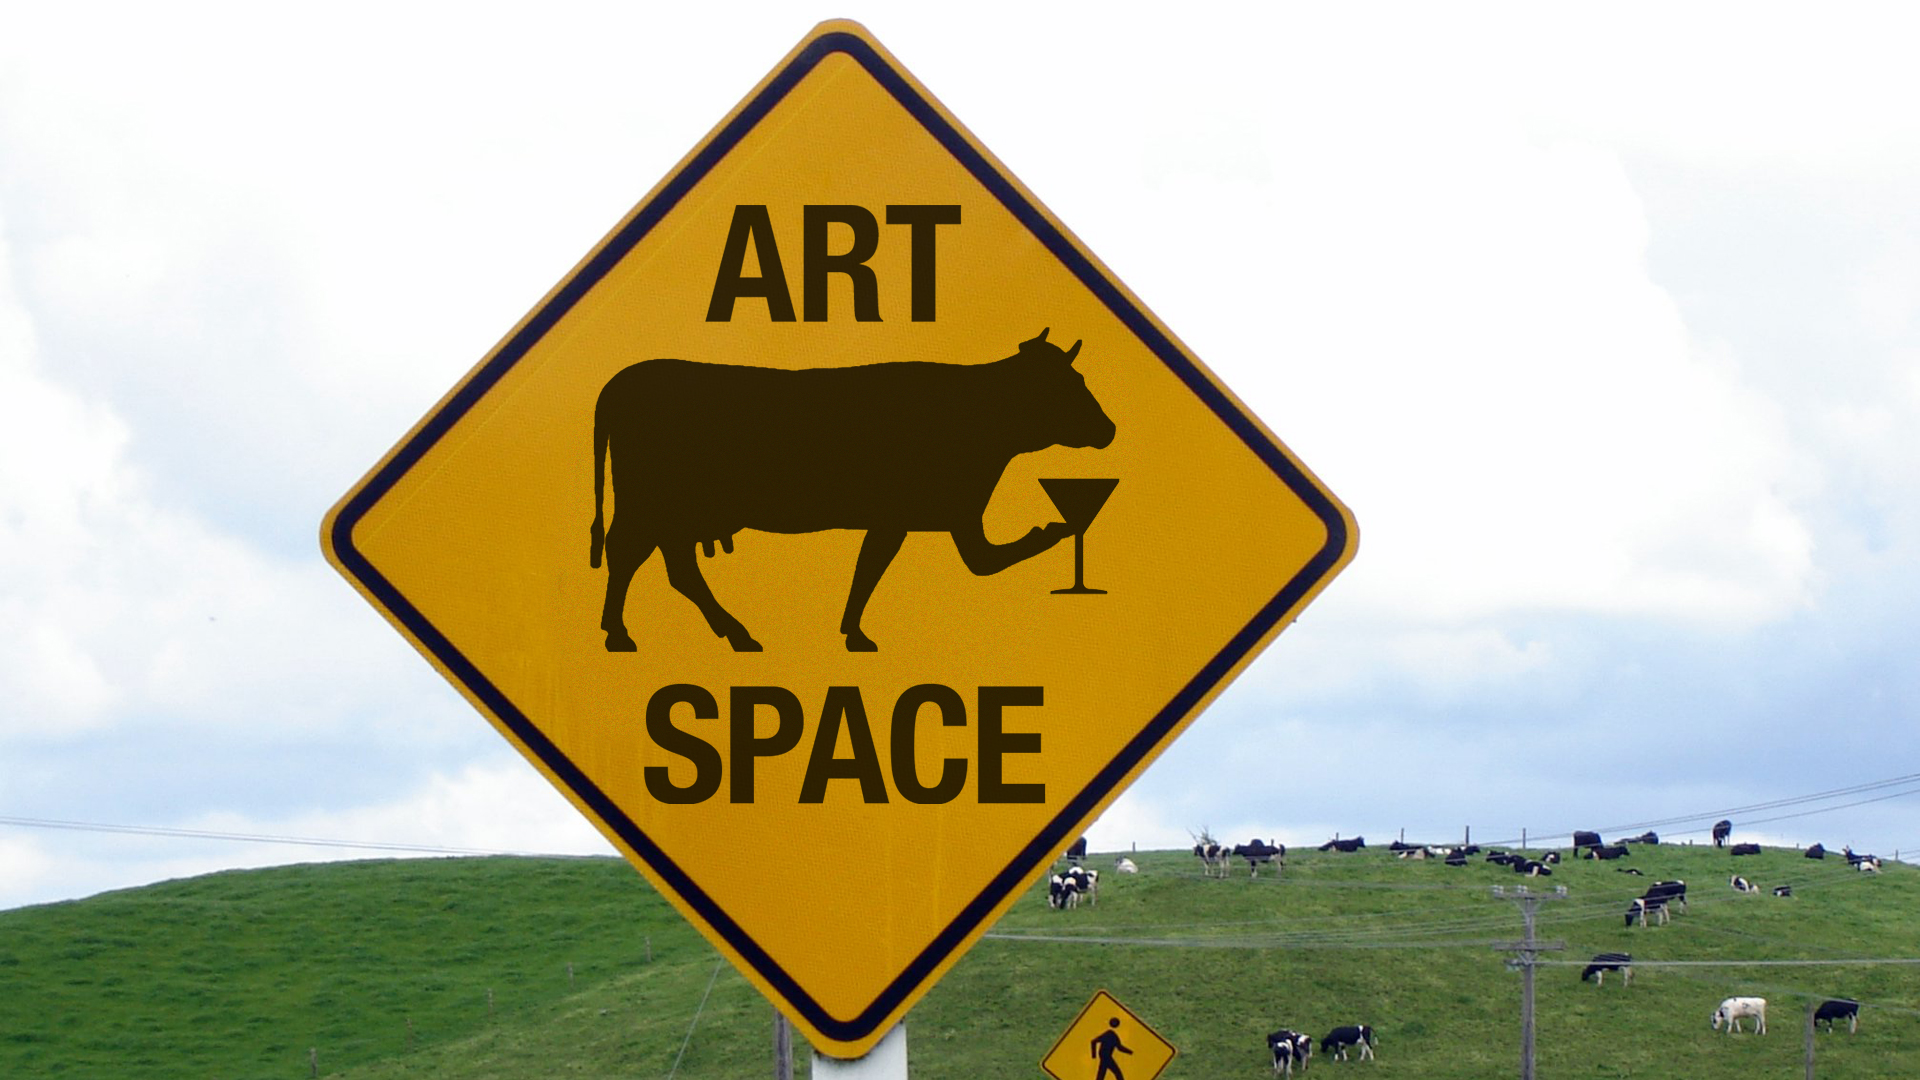 Photoshopped image of a warning sign with an image of a cow drinking alcohol